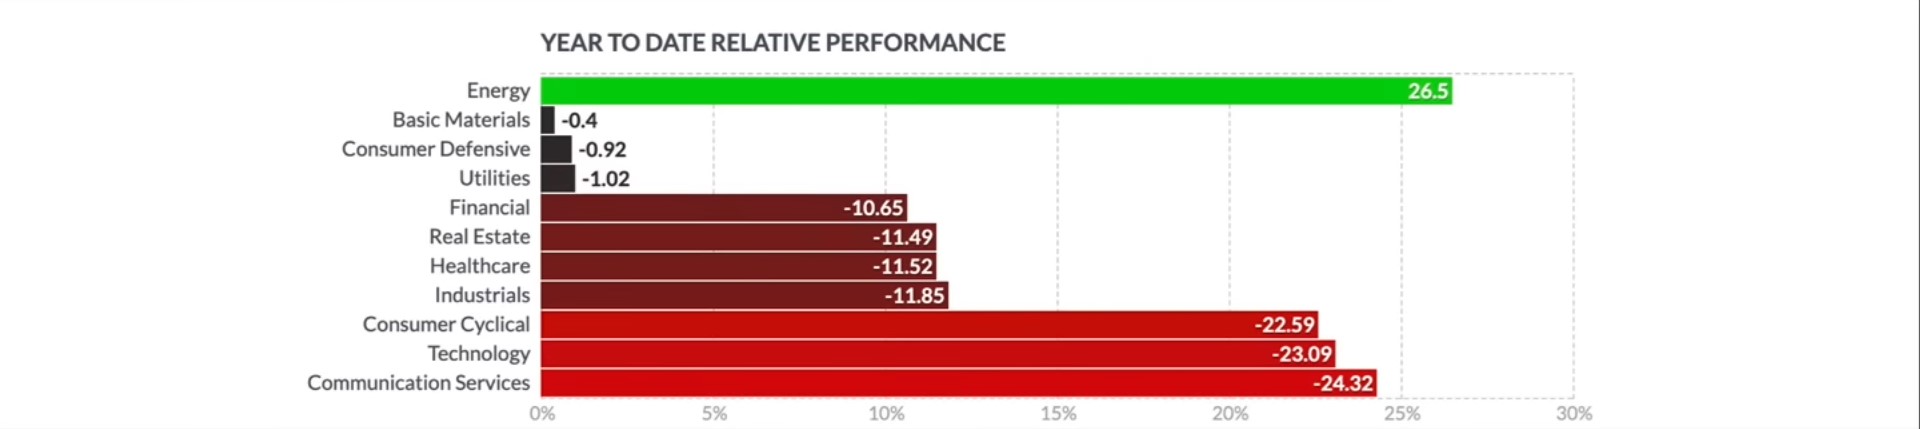 year to date relative performance of market sectors